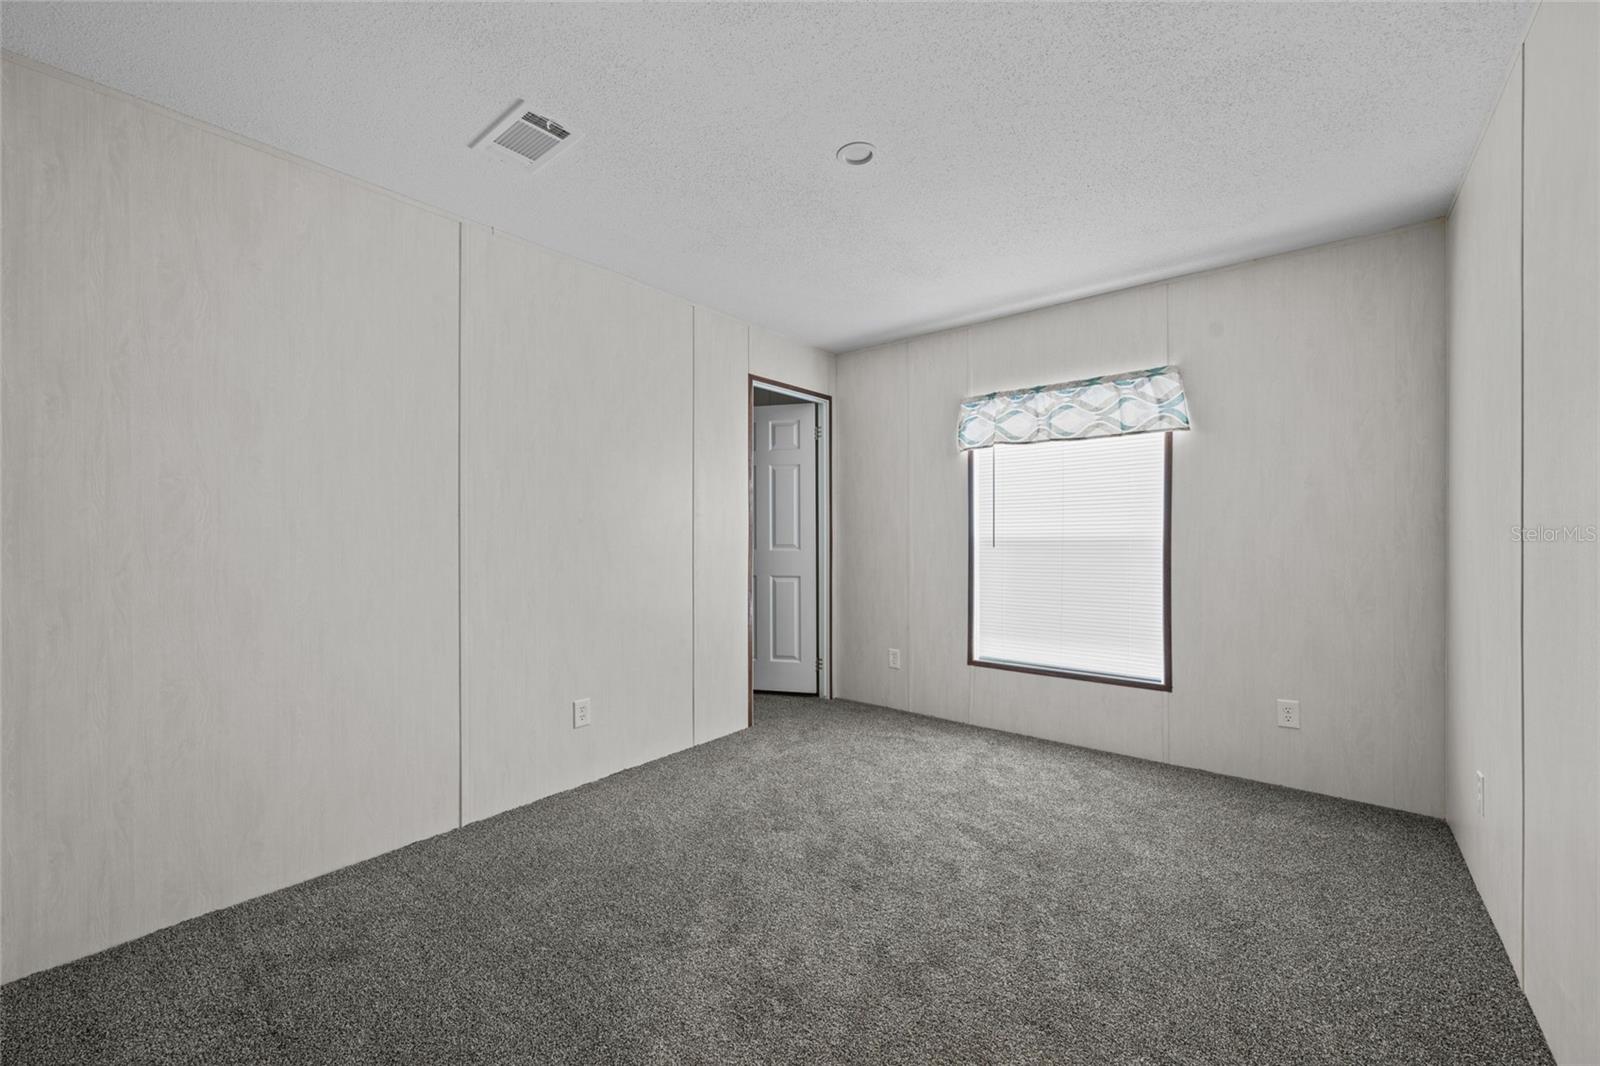 3rd bedroom with walk in closet- Stock photo from builder - Under construction